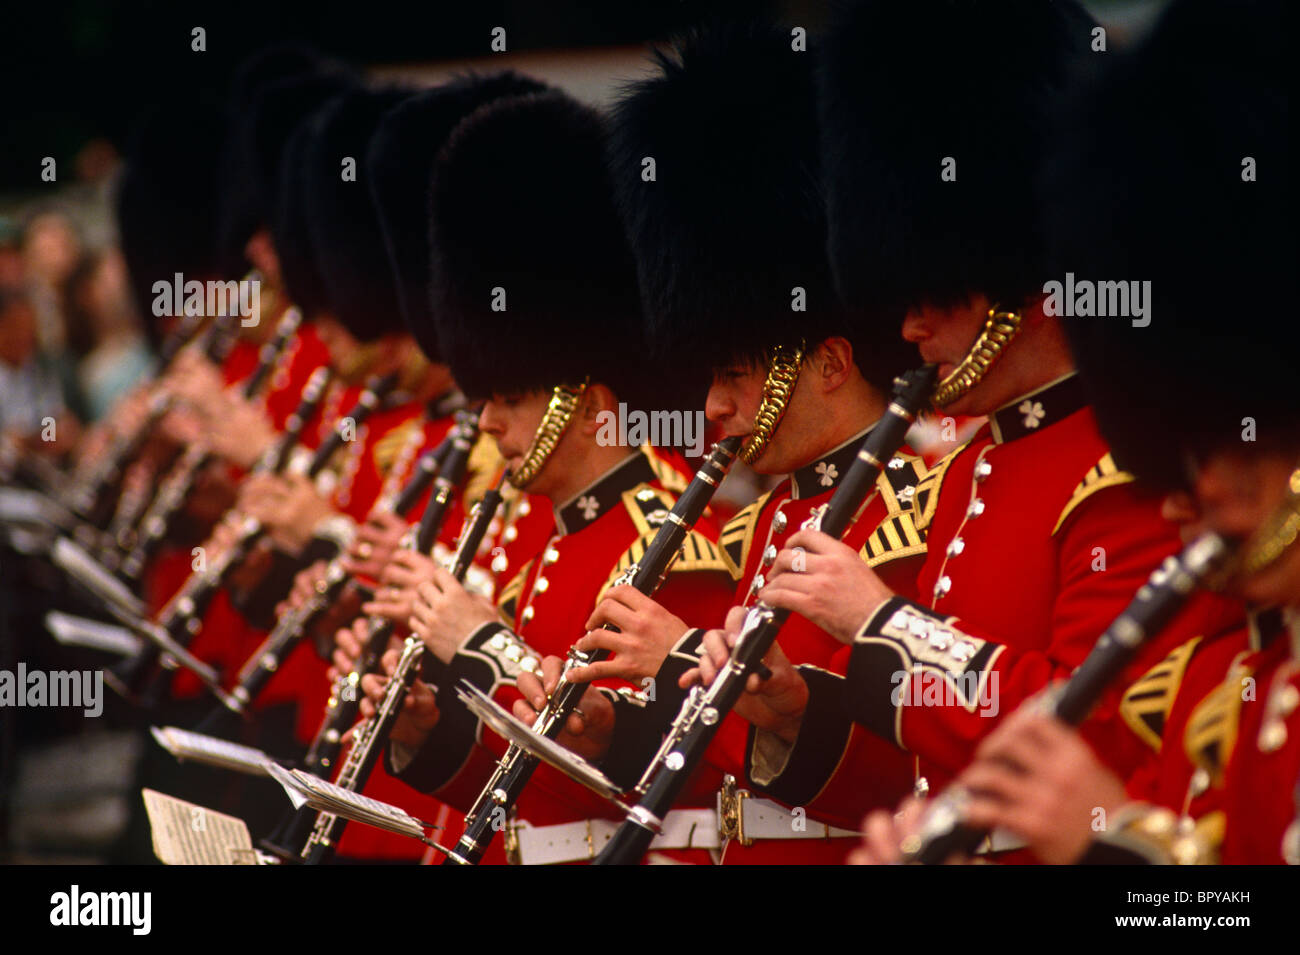 An entire rank of Grenadier Guardsmen musicians are playing clarinets as part of the Queen's Golden Jubilee celebrations. Stock Photo